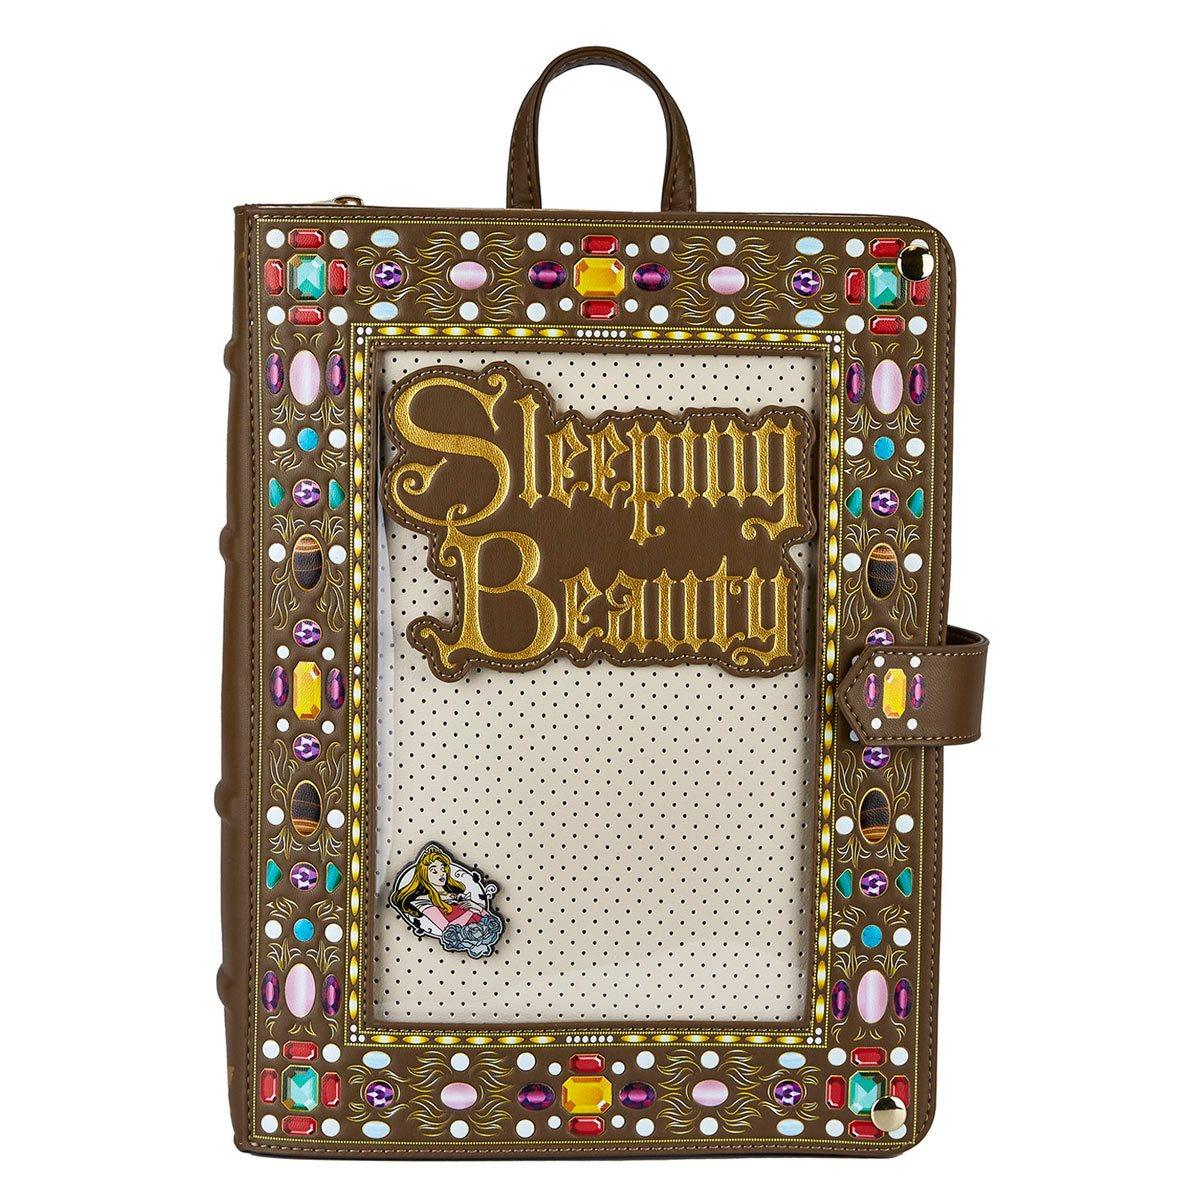 This Sleeping Beauty Clutch Looks Just Like the Storybook